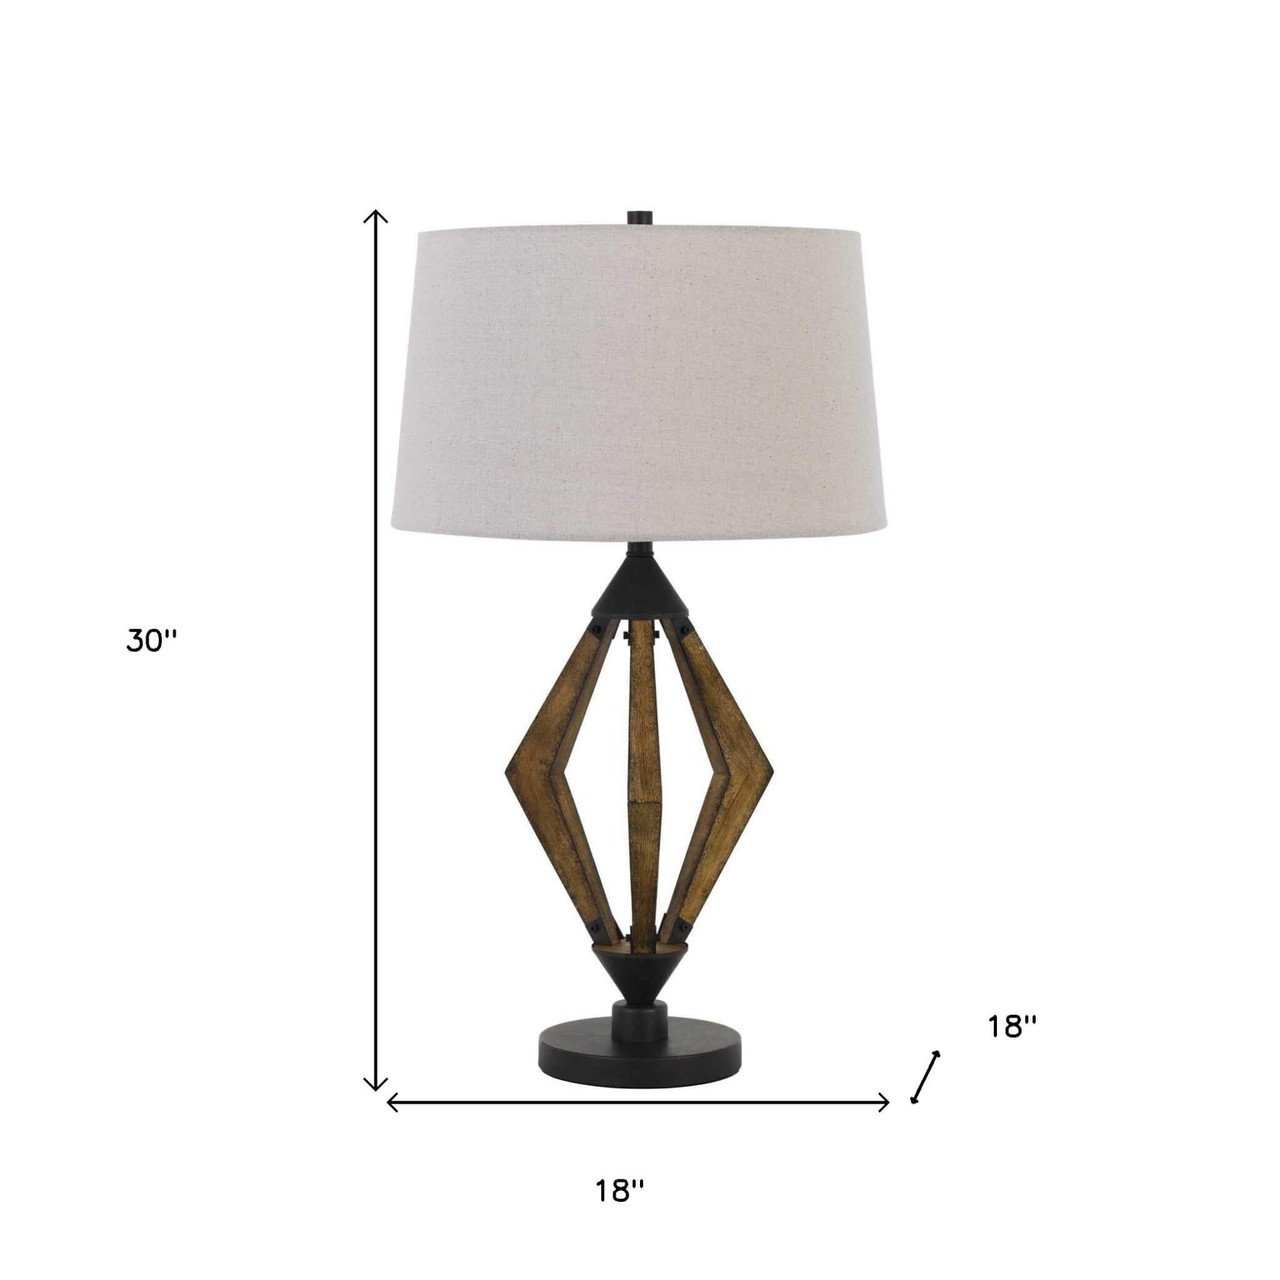 30" Black Metal Table Lamp With Brown Empire Shade-chicken pieces